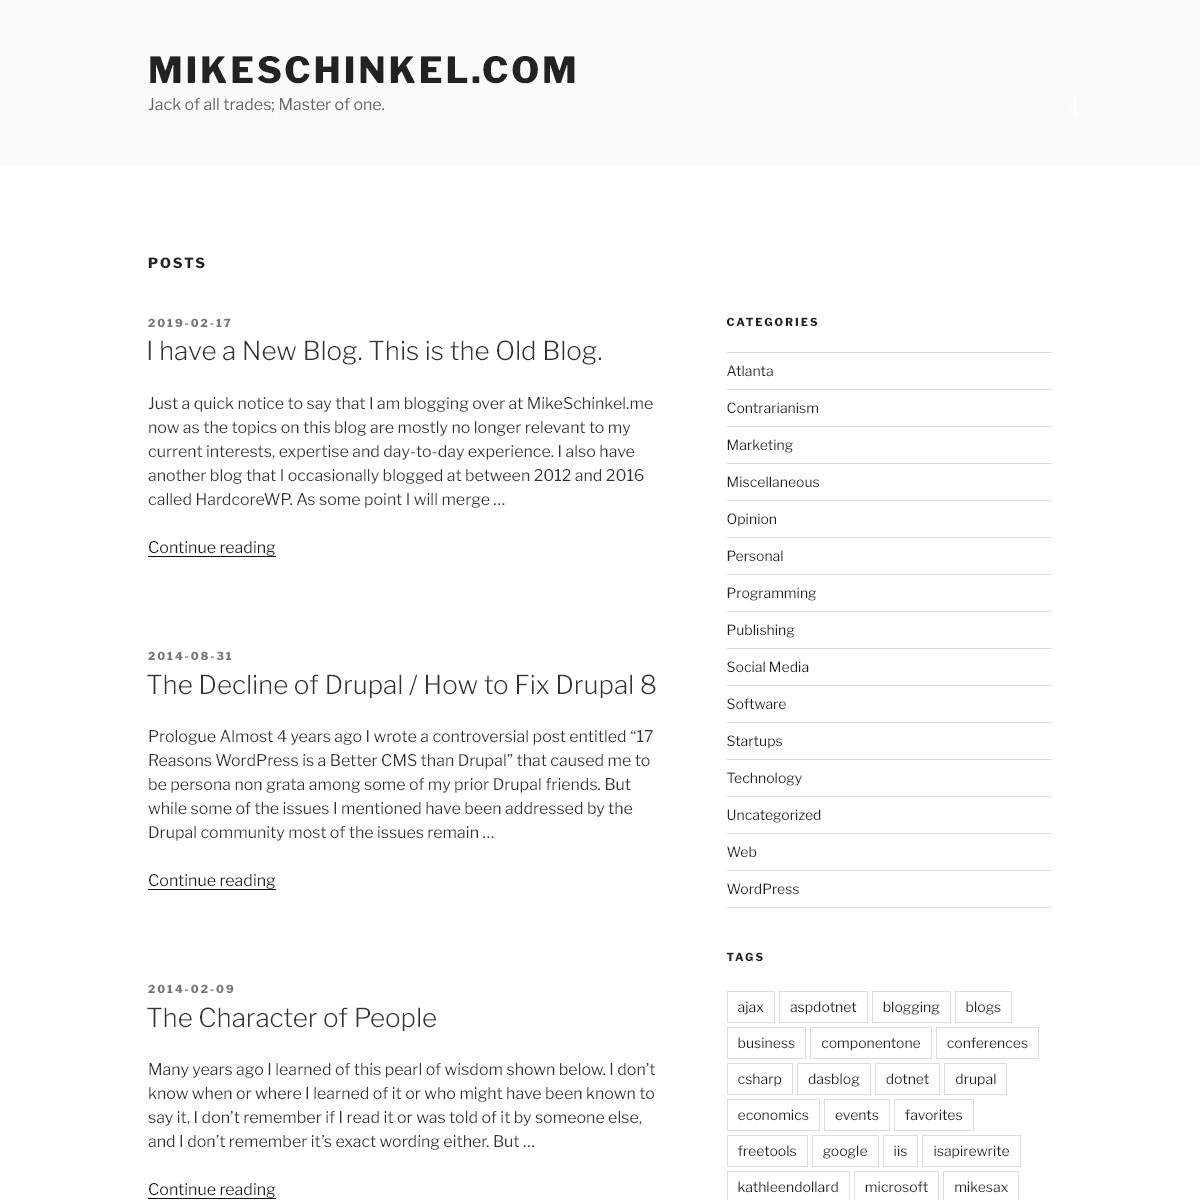 A complete backup of mikeschinkel.com